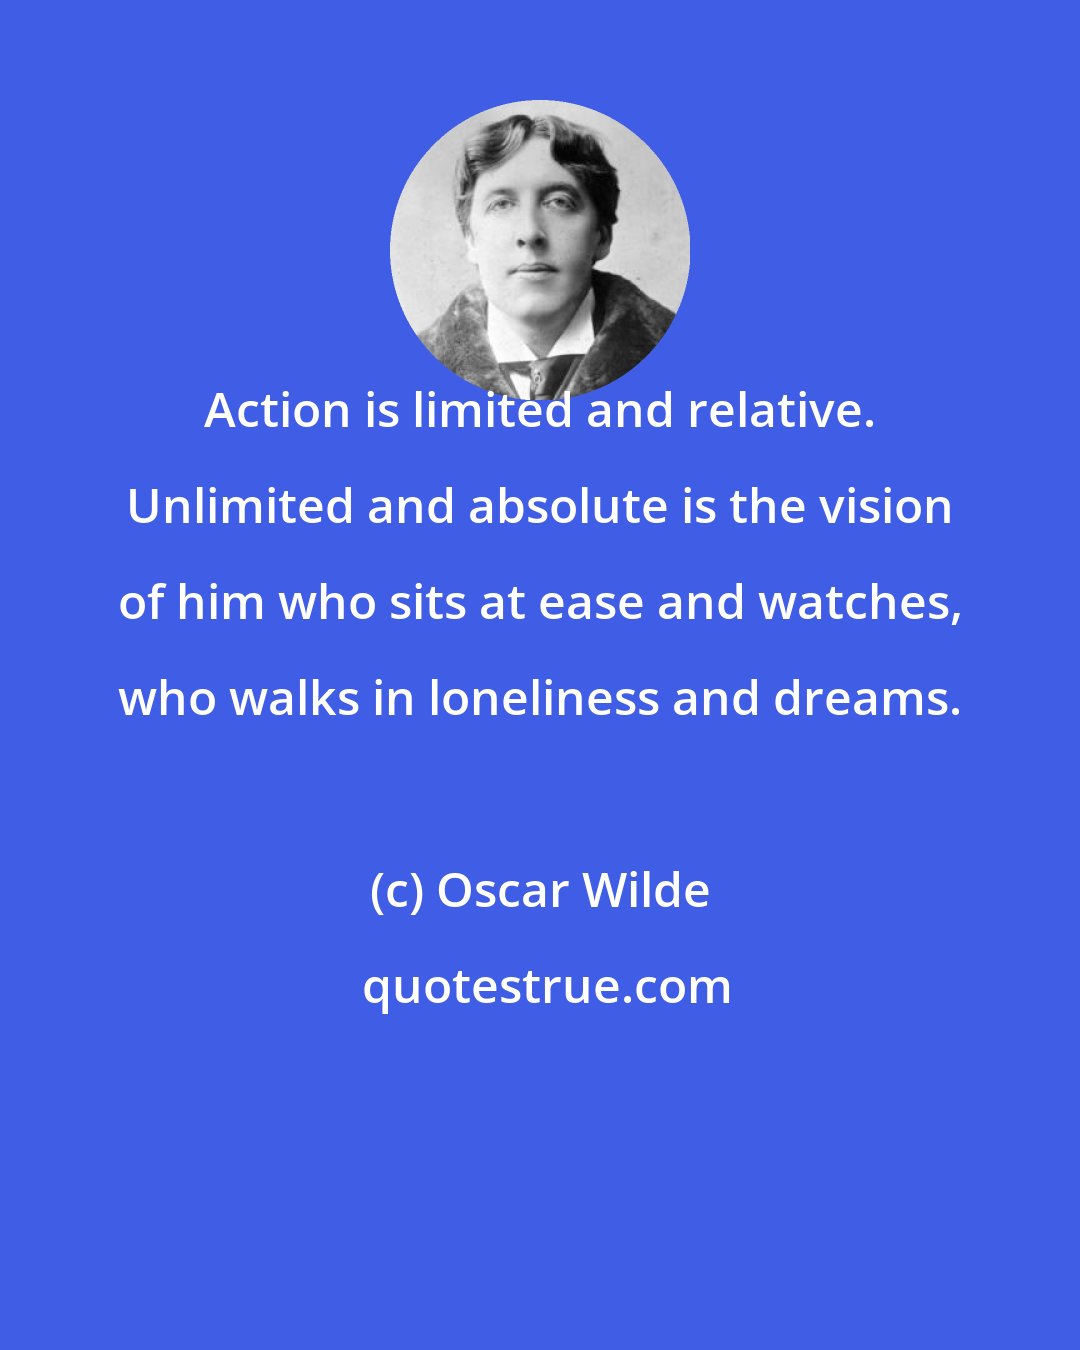 Oscar Wilde: Action is limited and relative. Unlimited and absolute is the vision of him who sits at ease and watches, who walks in loneliness and dreams.